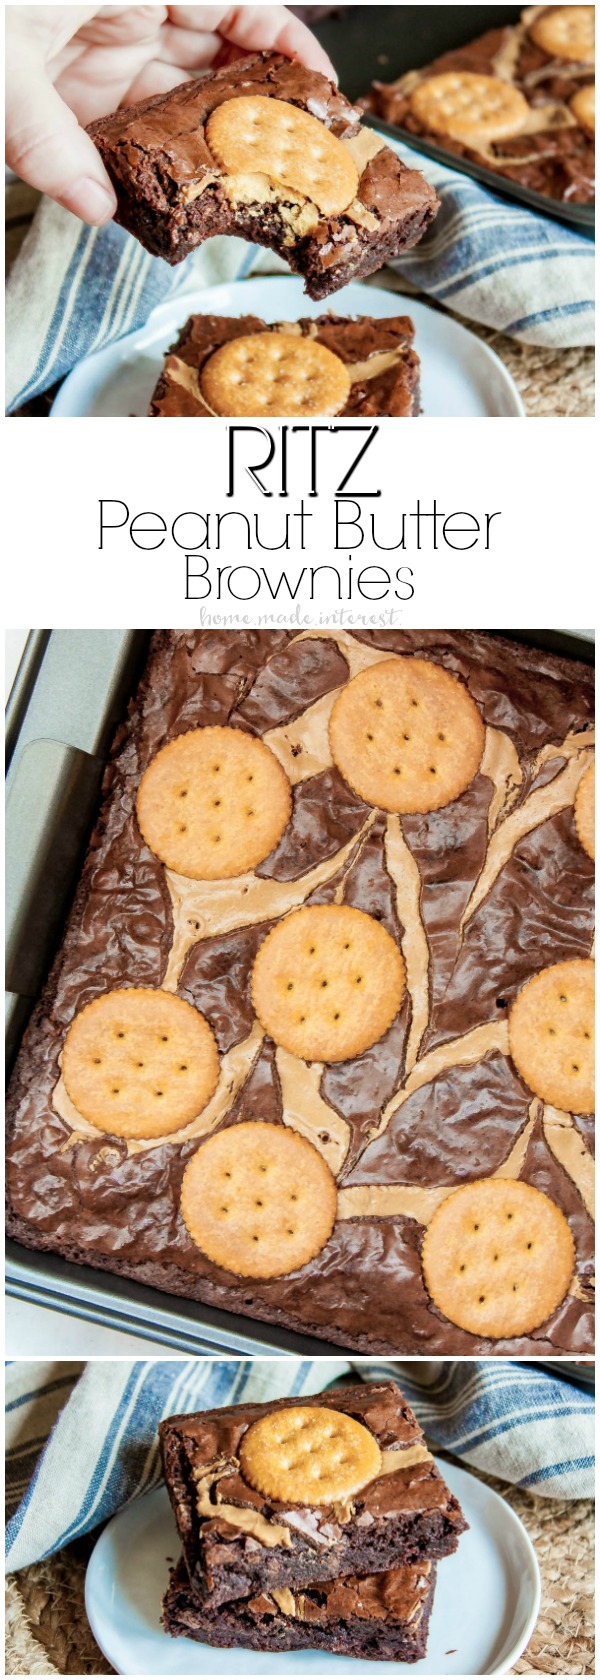 RITZ Peanut Butter Brownies | This sweet and salty dessert recipe is super easy to make and so good! This brownie recipe uses peanut butter and RITZ crackers to make a sweet and salty brownie recipe that everyone in my house loves. If your kids love peanut butter and crackers they’re going to love these peanut butter brownies with RITZ crackers!